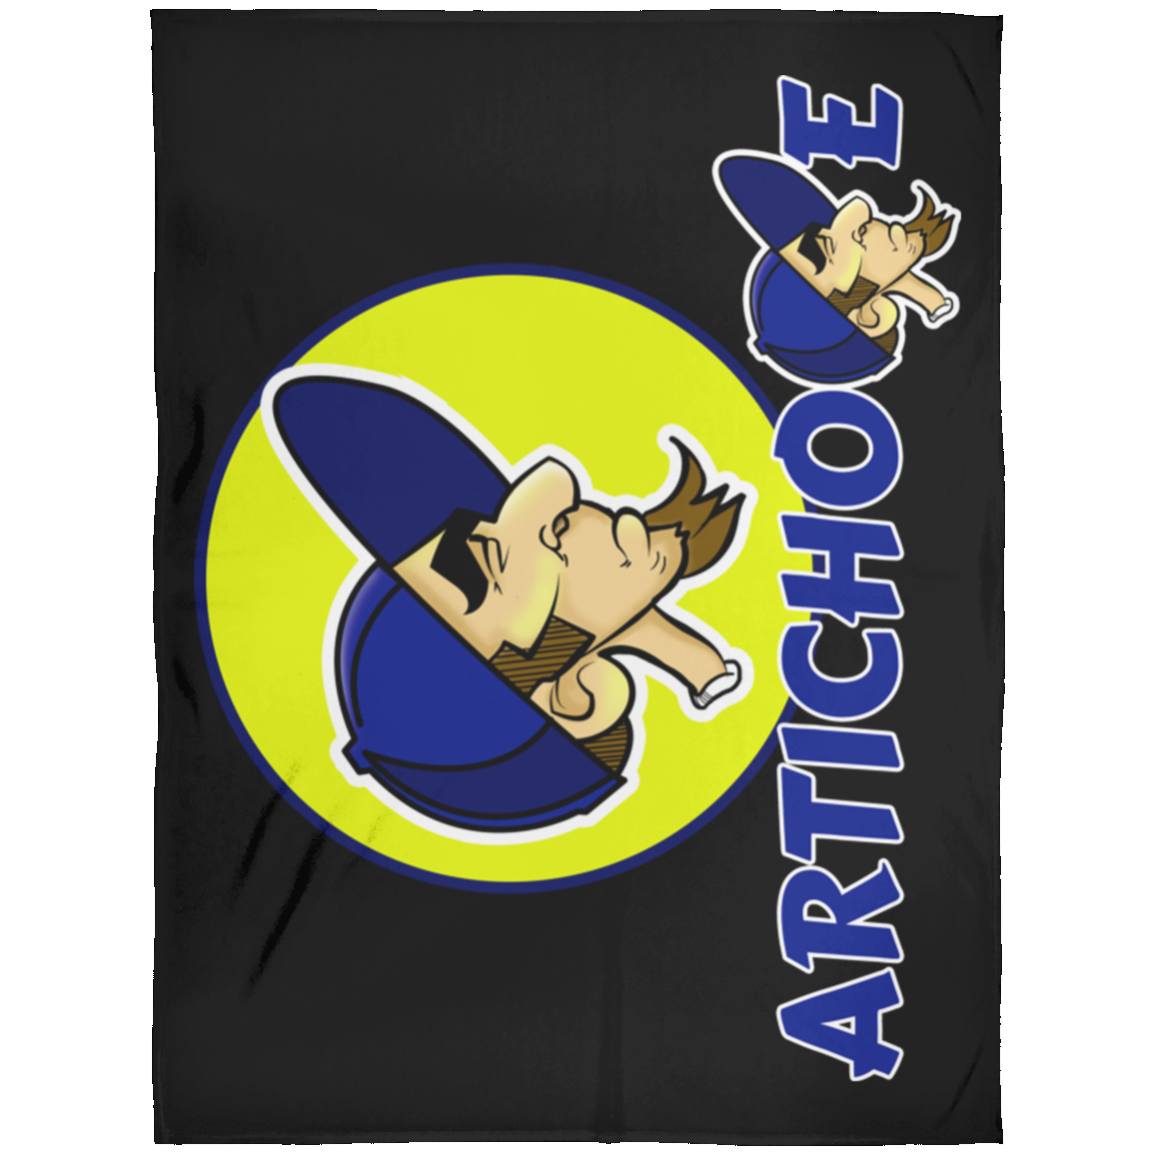 ZZ#20 ArtichokeUSA Characters and Fonts. "Clem" Let’s Create Your Own Design Today. Arctic Fleece Blanket 60x80